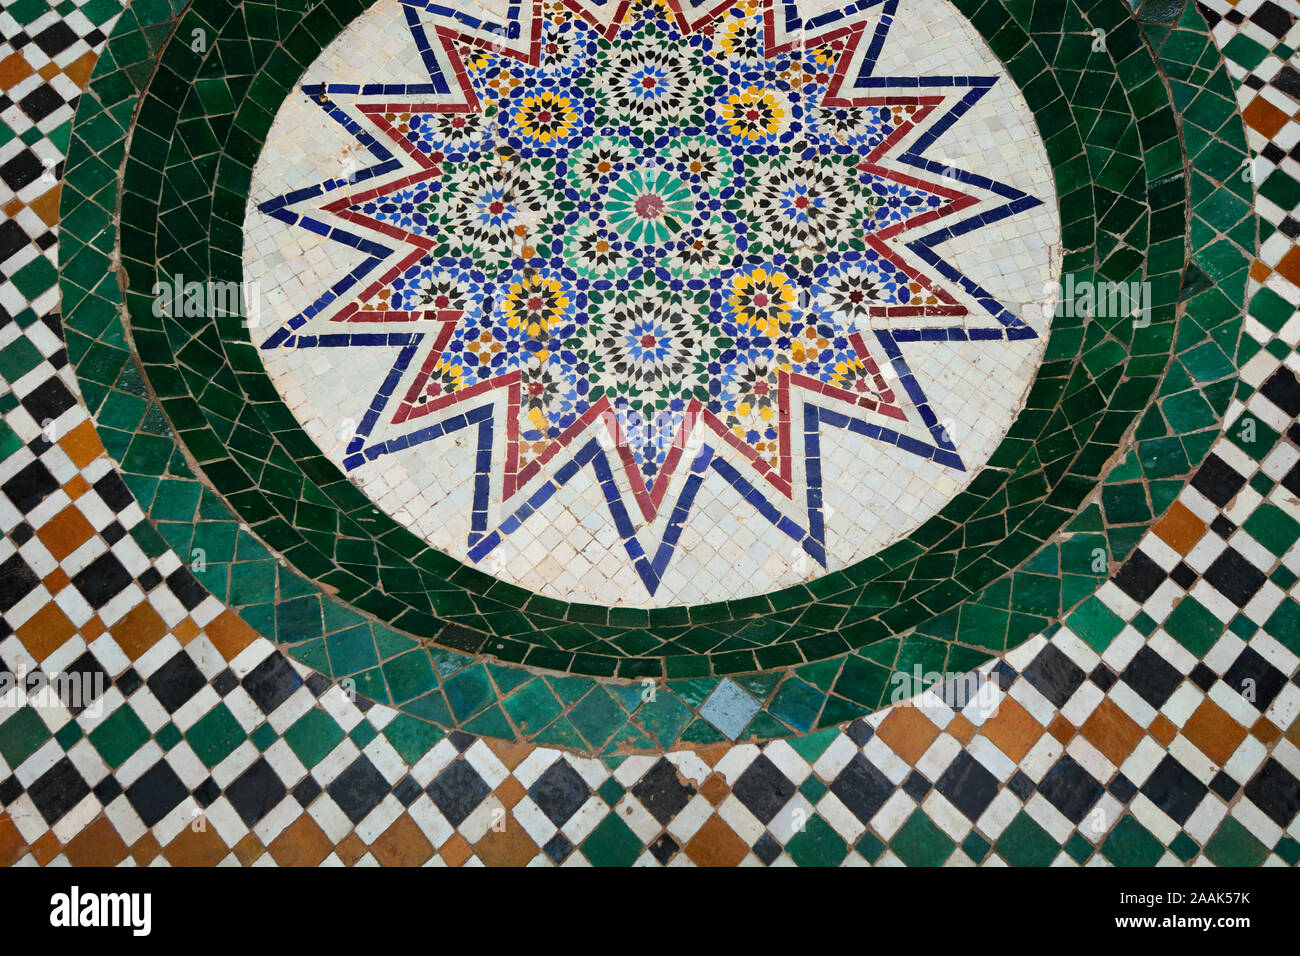 Islamic decorative tiles (zeligs) in the Marrakech Museum, a 19th Century palace inside the Medina, Marrakech, Morocco Stock Photo